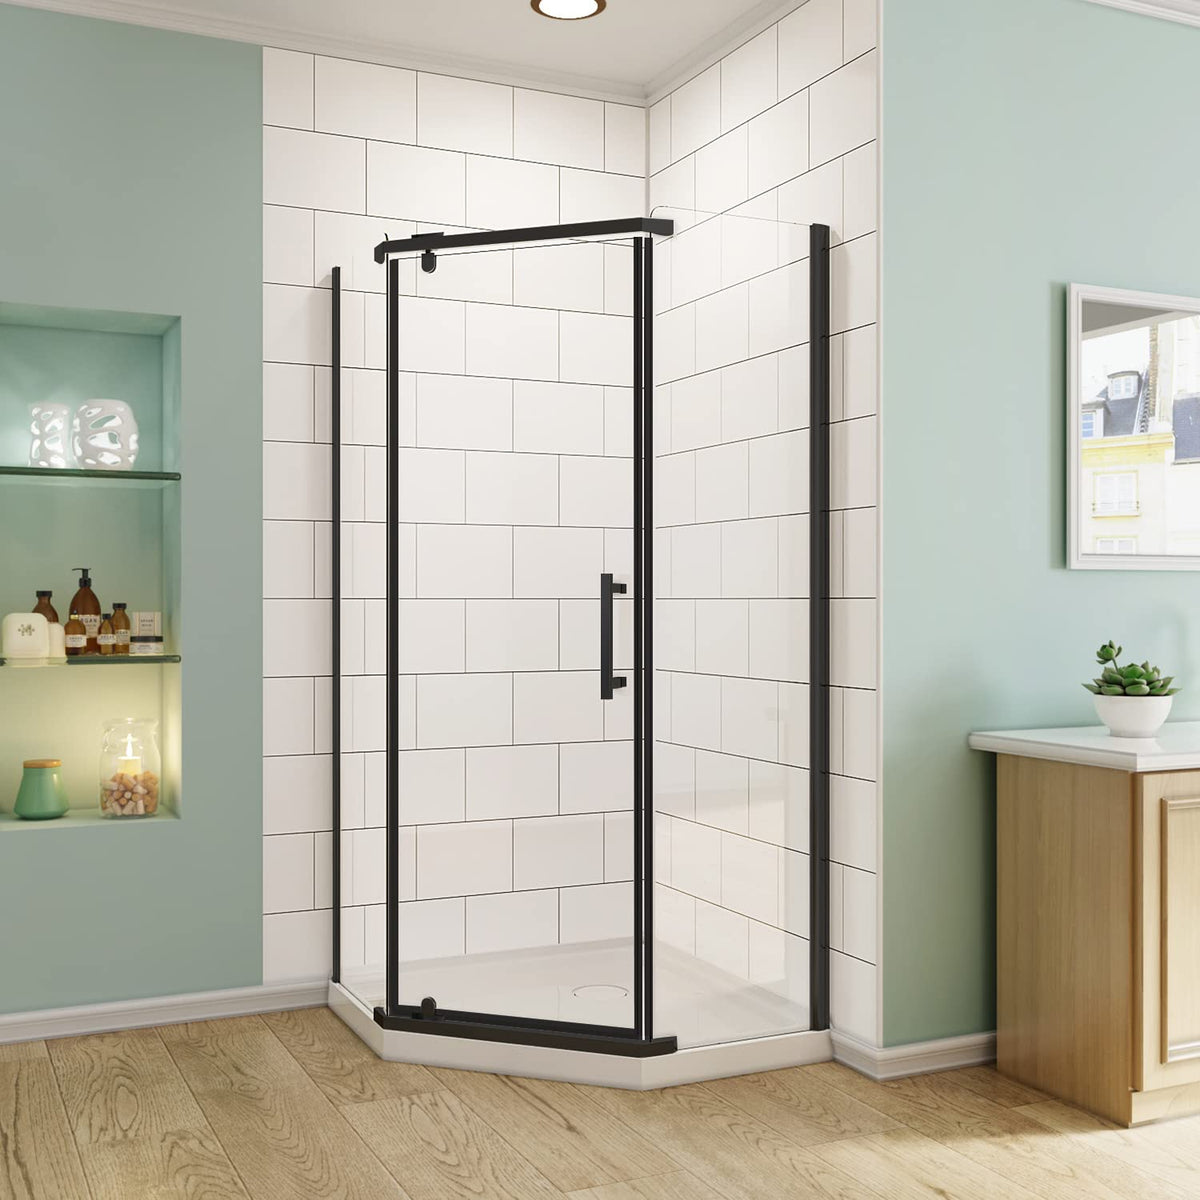 SUNNY SHOWER 36.7 in. W x 36.7 in. D x 71.8 in. H Black Finish Pivot Enclosures With Pivot Door